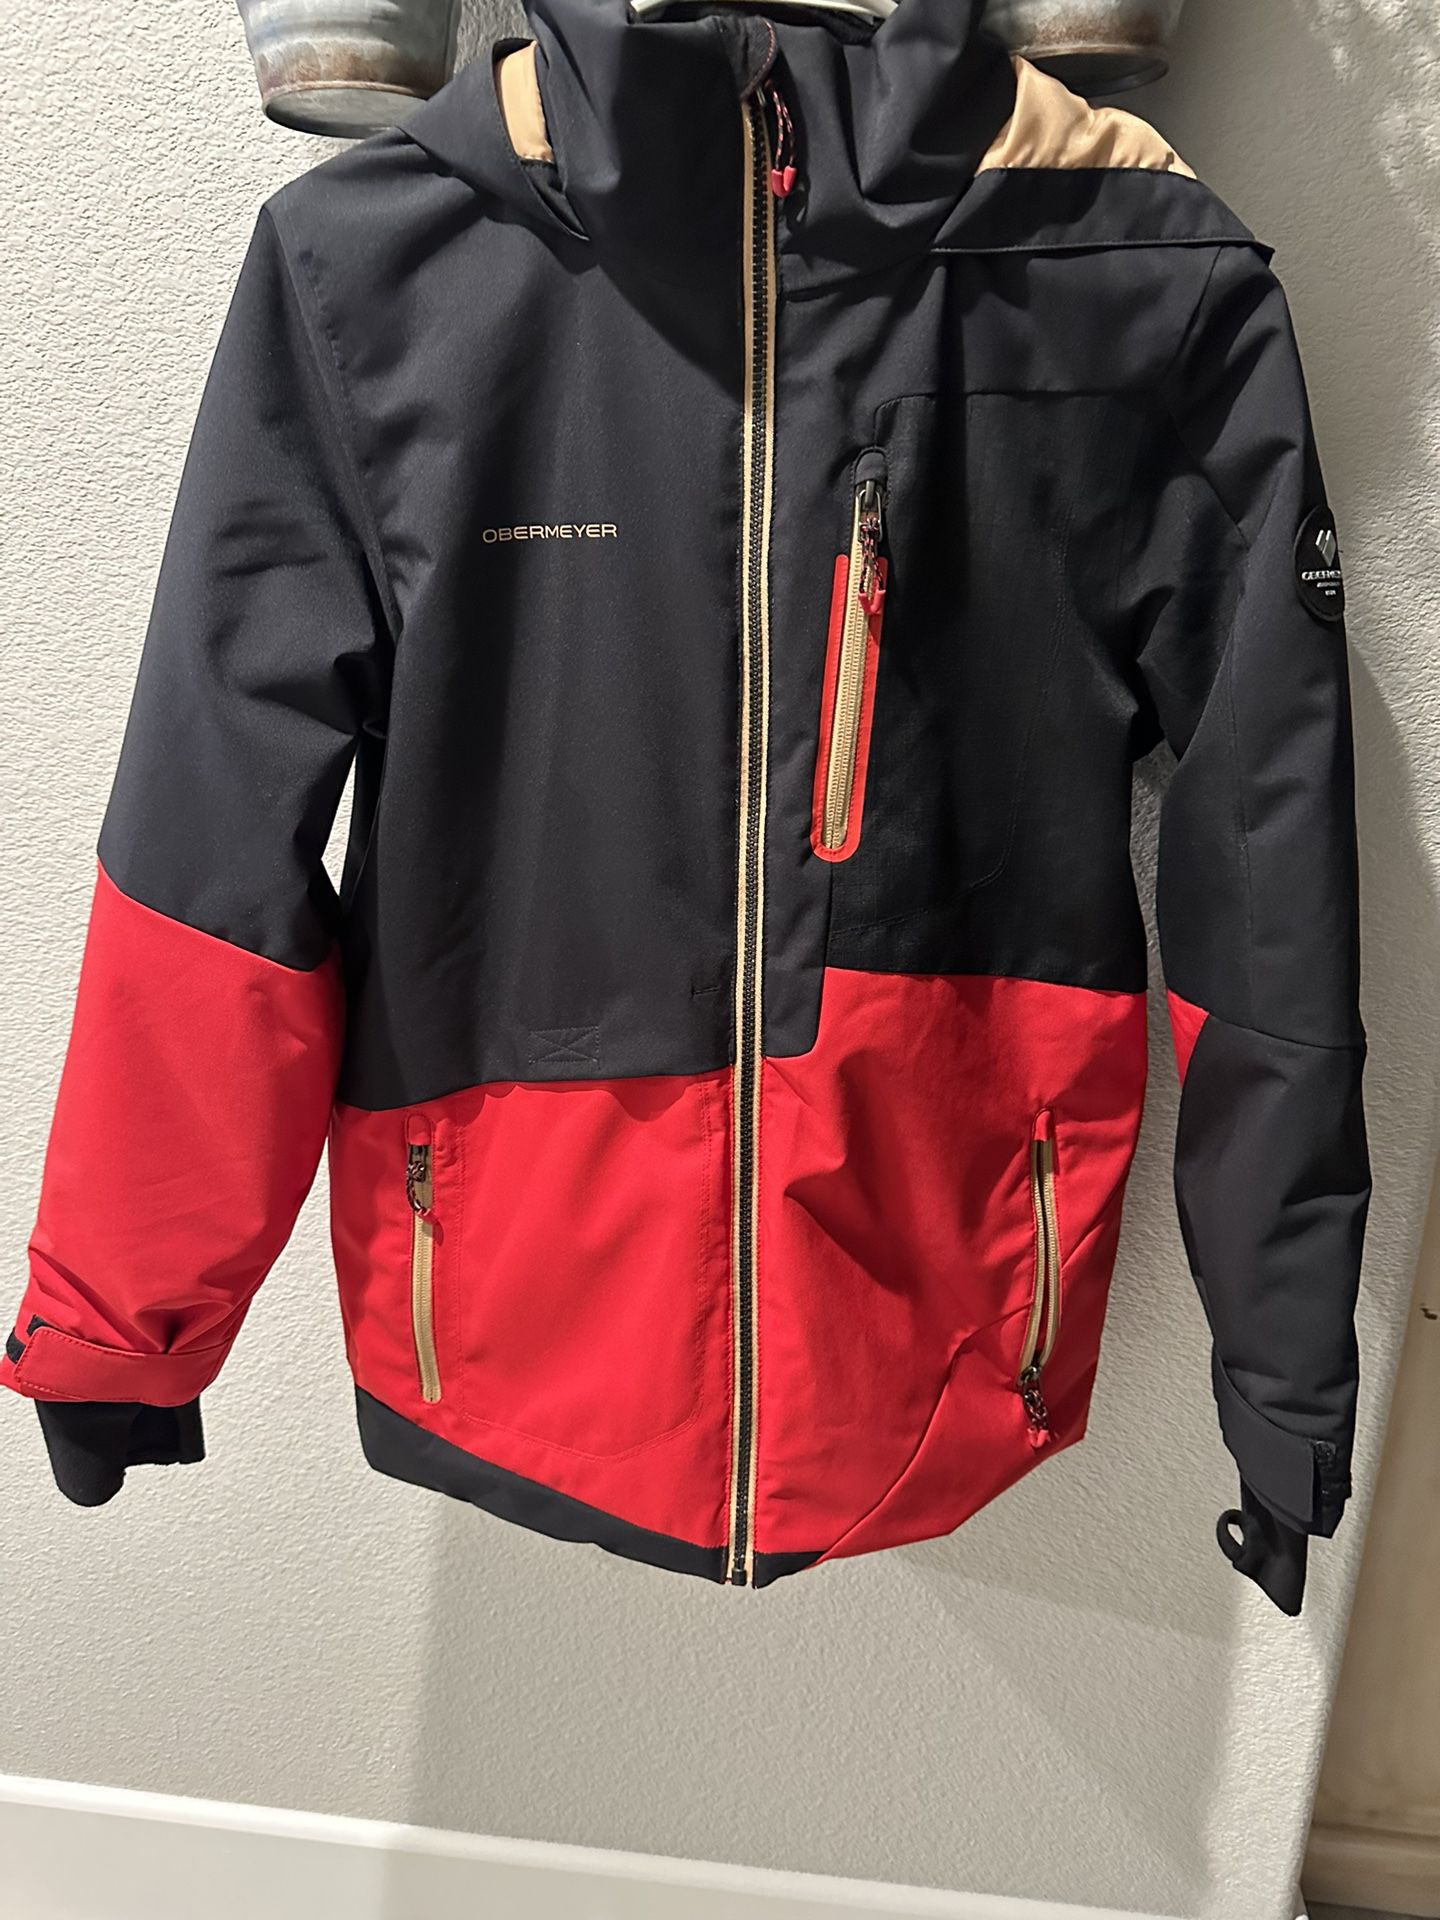 Obermeyer Axel Insulated Jacket - Boys’ for Sale in Reno, NV - OfferUp